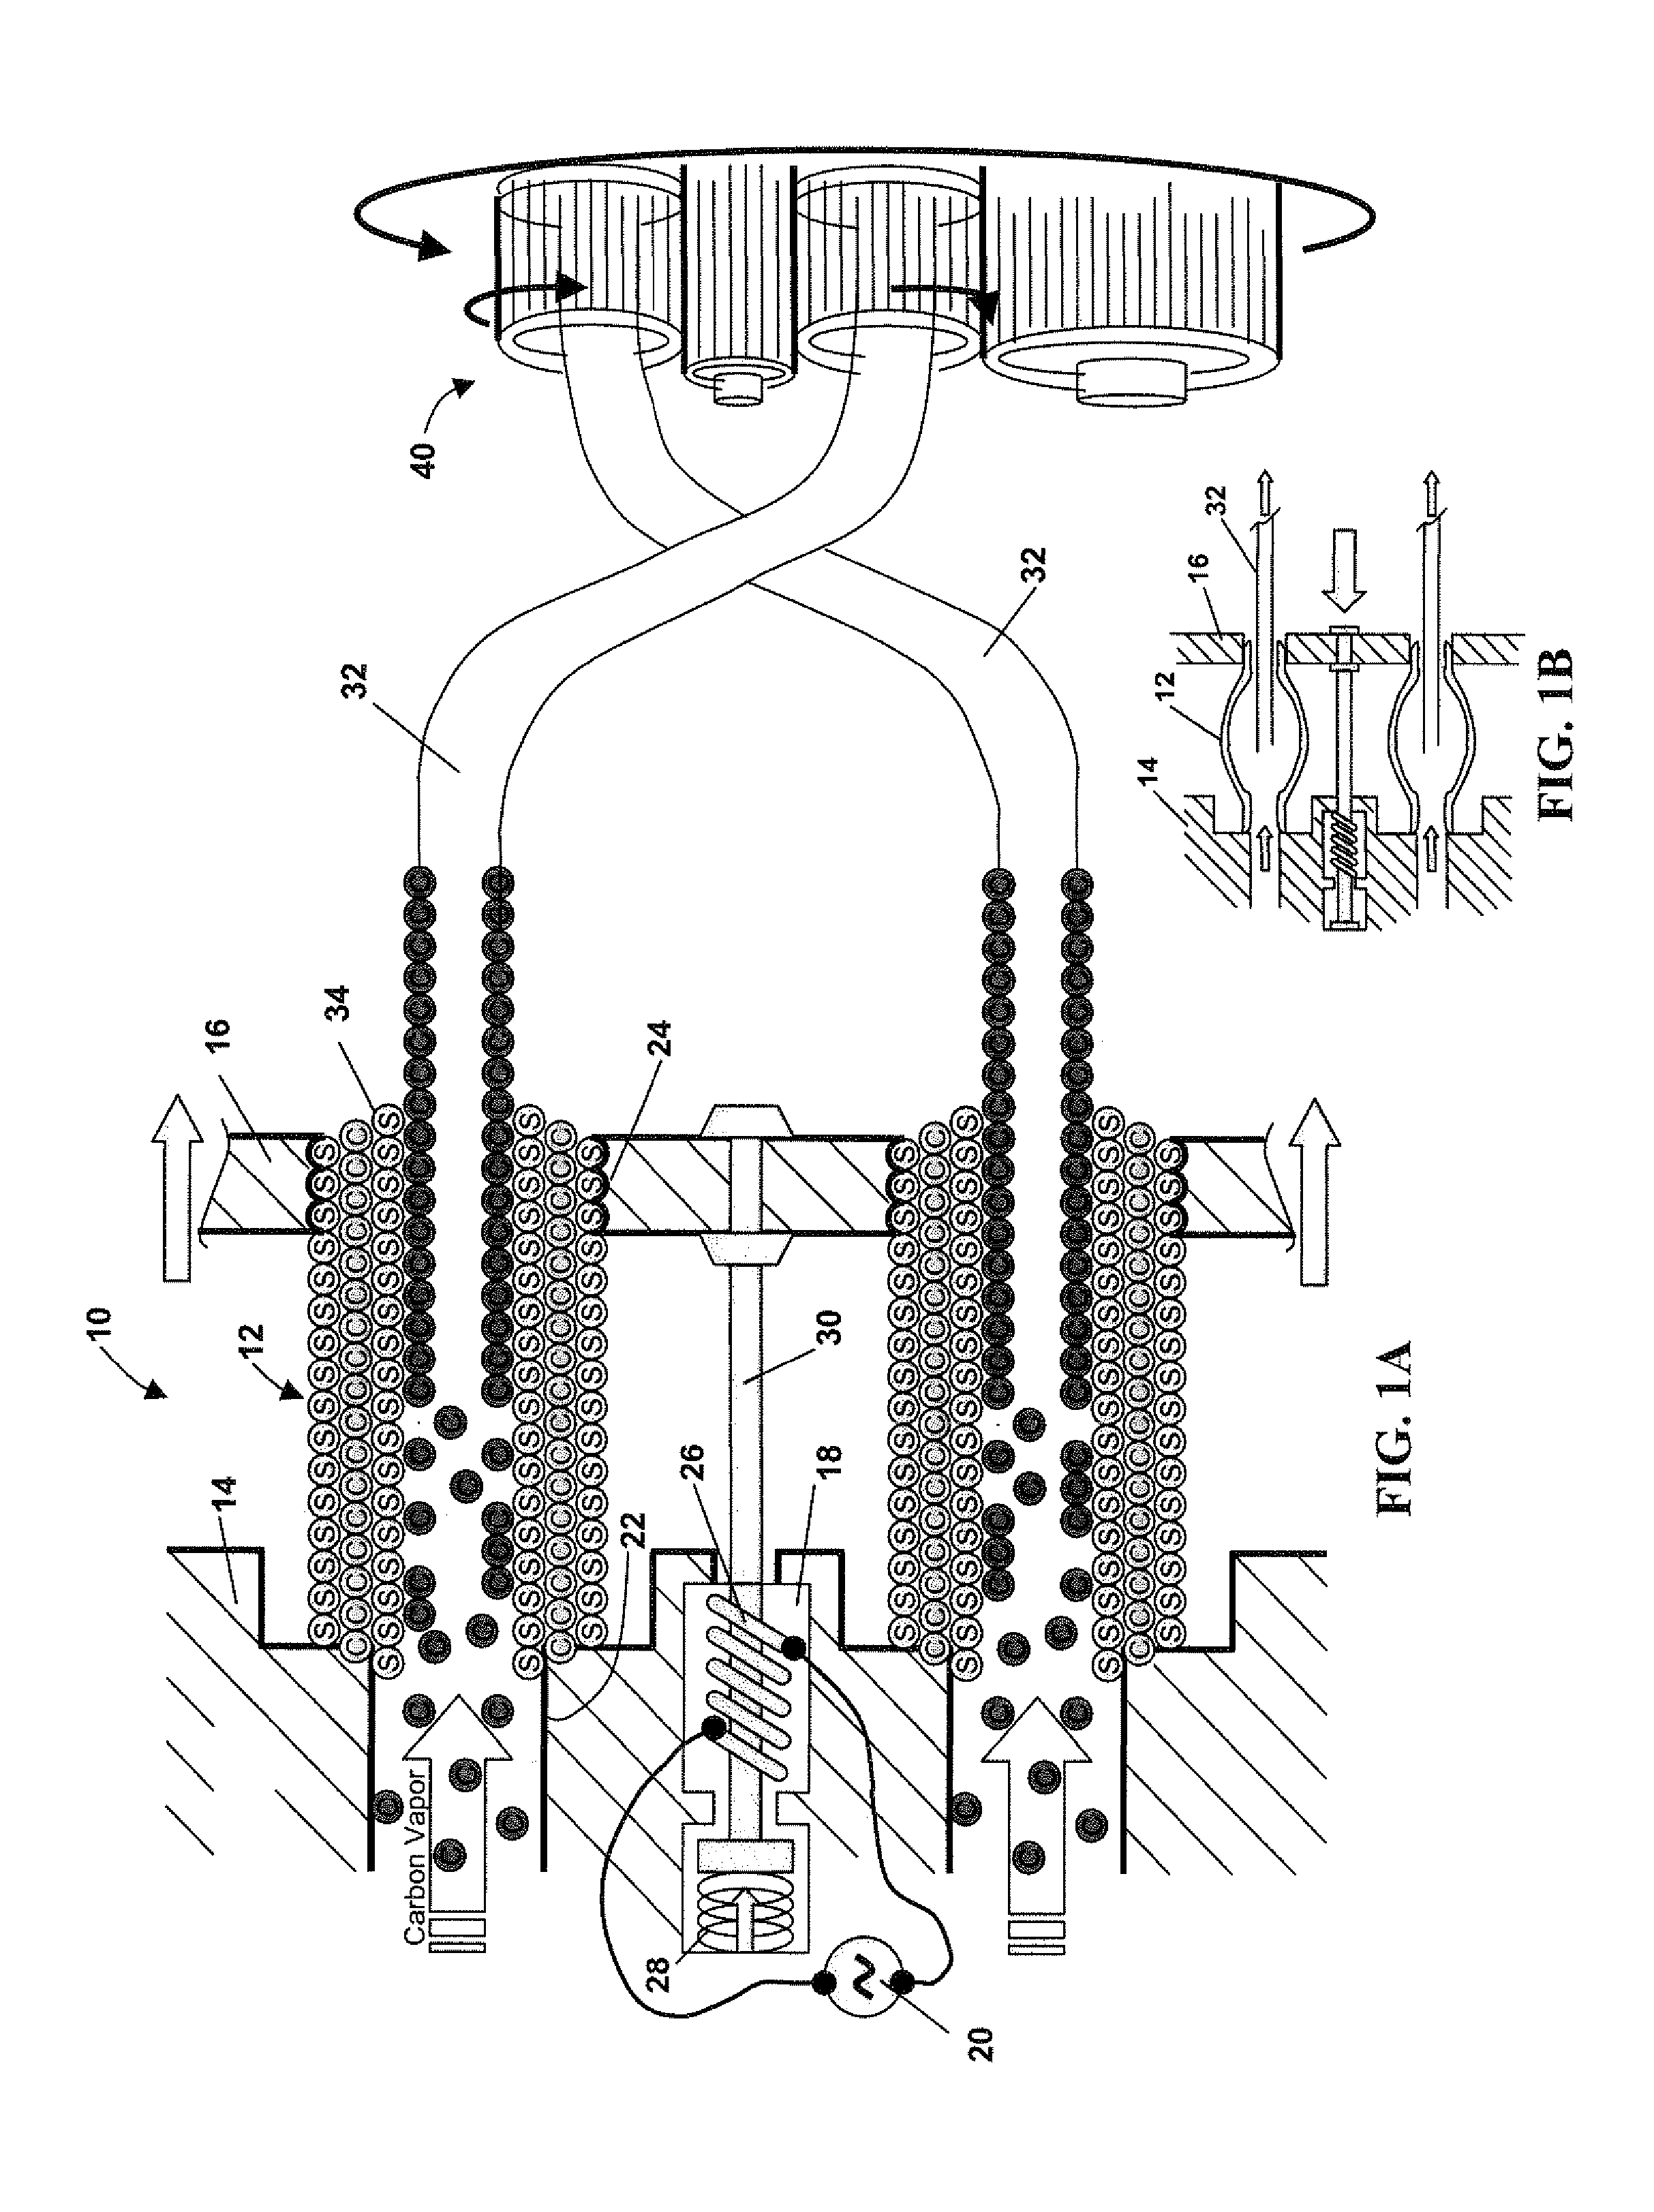 Carbon Nanotube (CNT) Extrusion Methods And CNT Wire And Composites